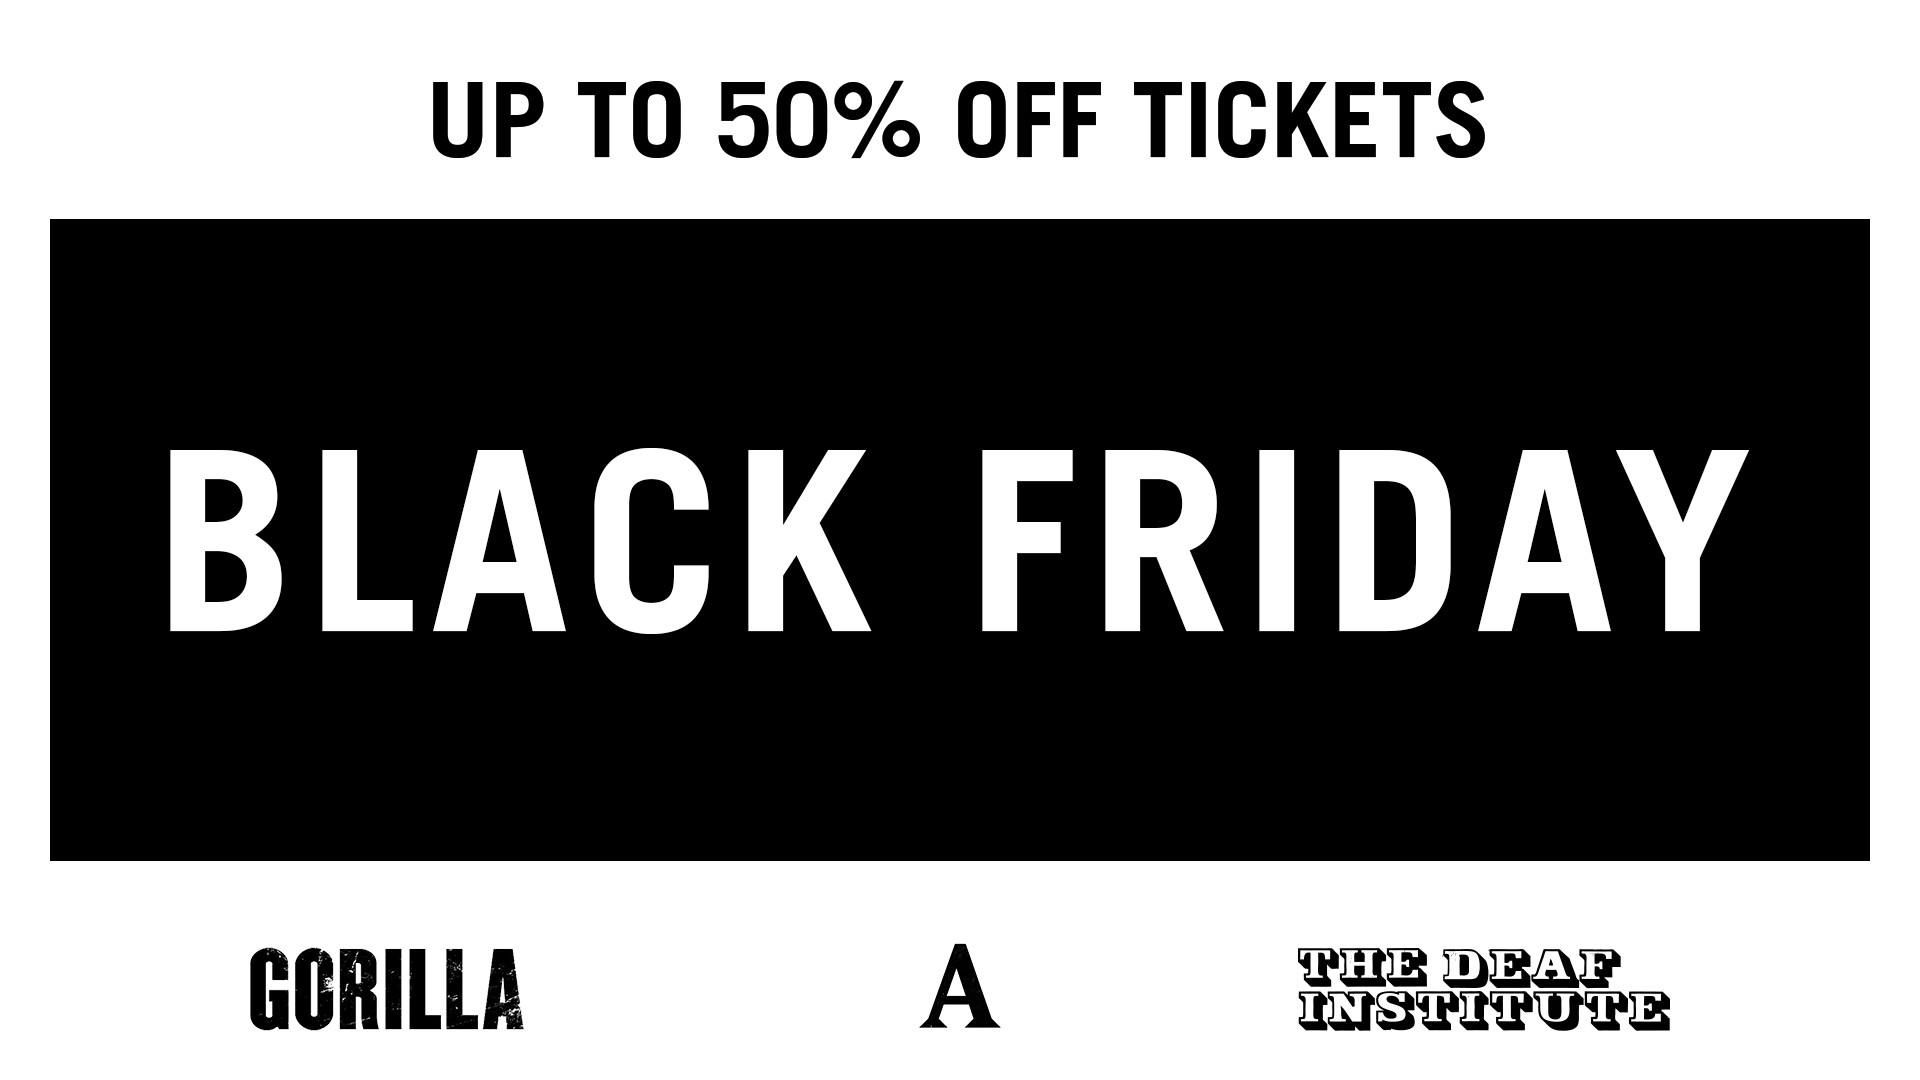 BLACK FRIDAY: UP TO 50% OFF